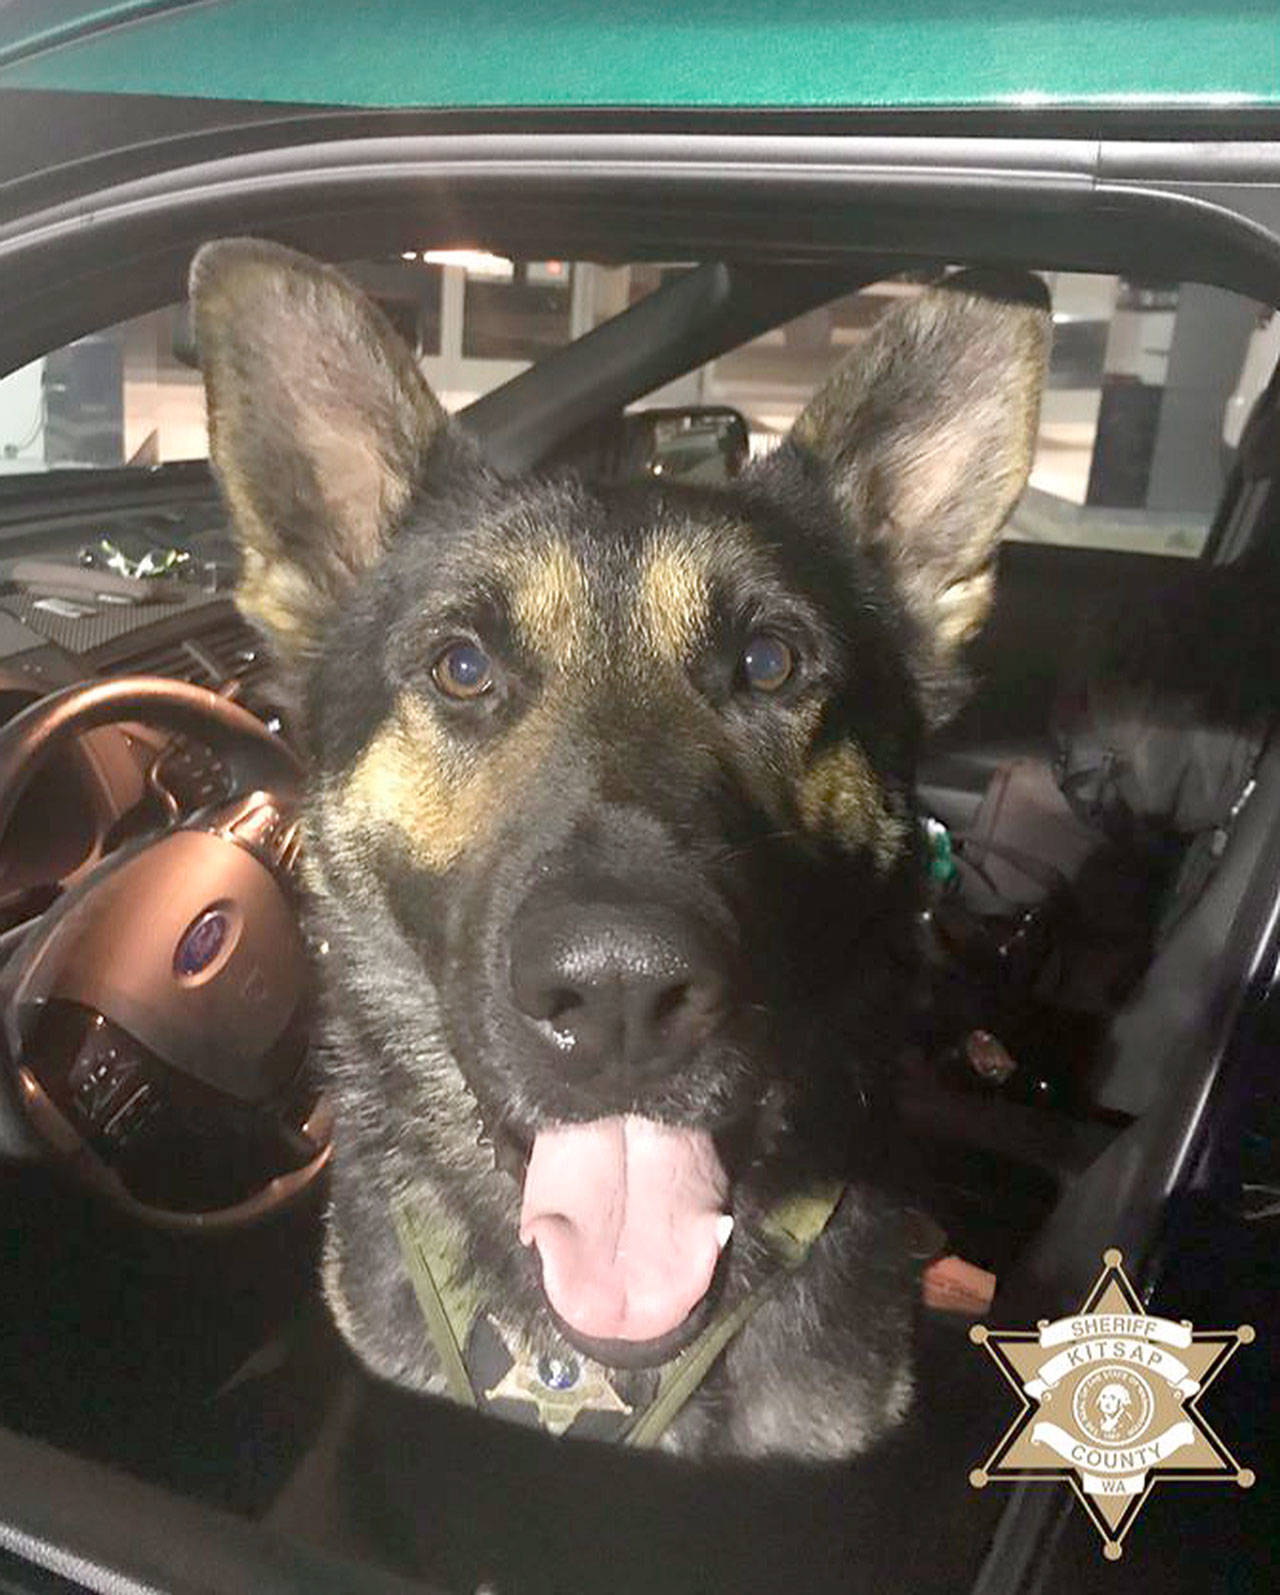 KCSO photo                                K-9 Cooper was given his name in honor of fallen Pierce County Sheriff’s Office deputy Cooper Dyson, who died in the line of duty on Dec. 21 while helping his partners during a domestic violence incident.